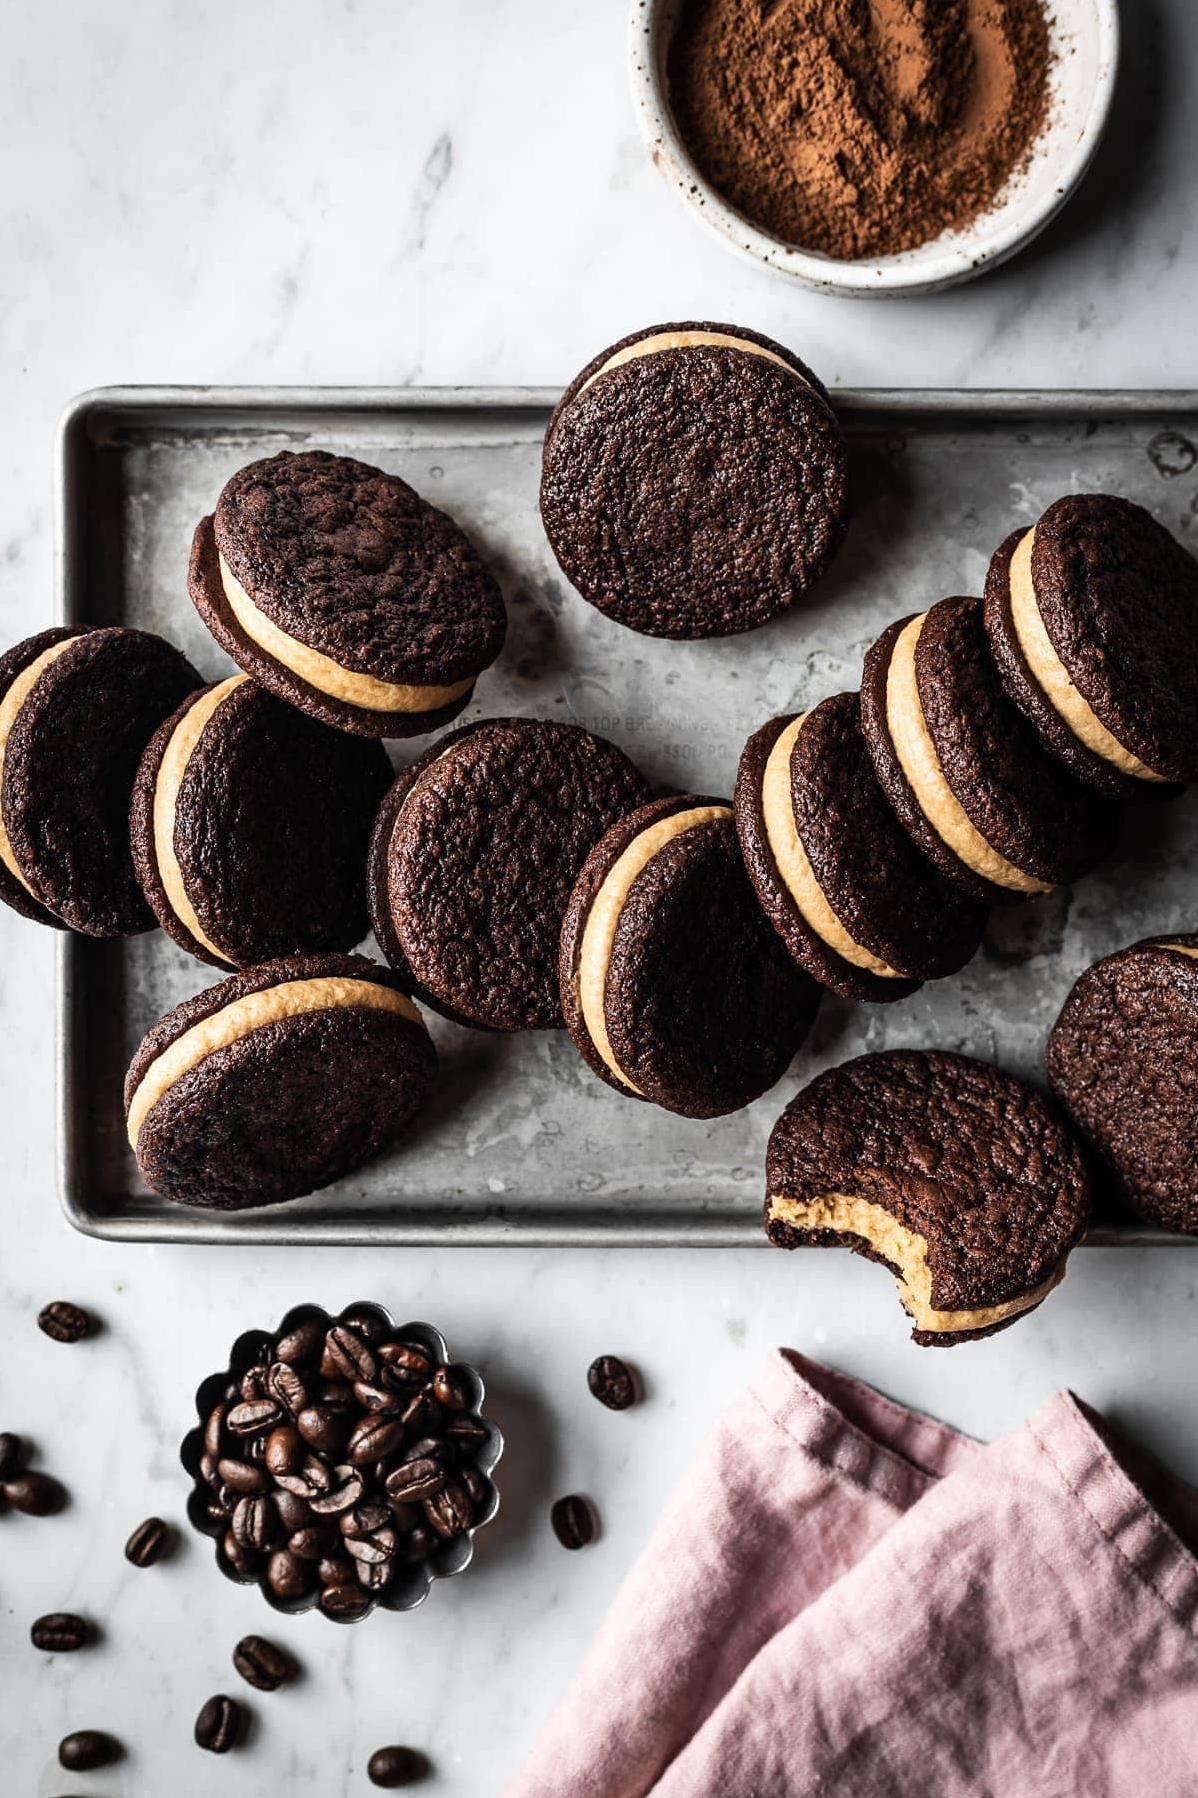  One bite of these cookies and your taste buds will thank you.